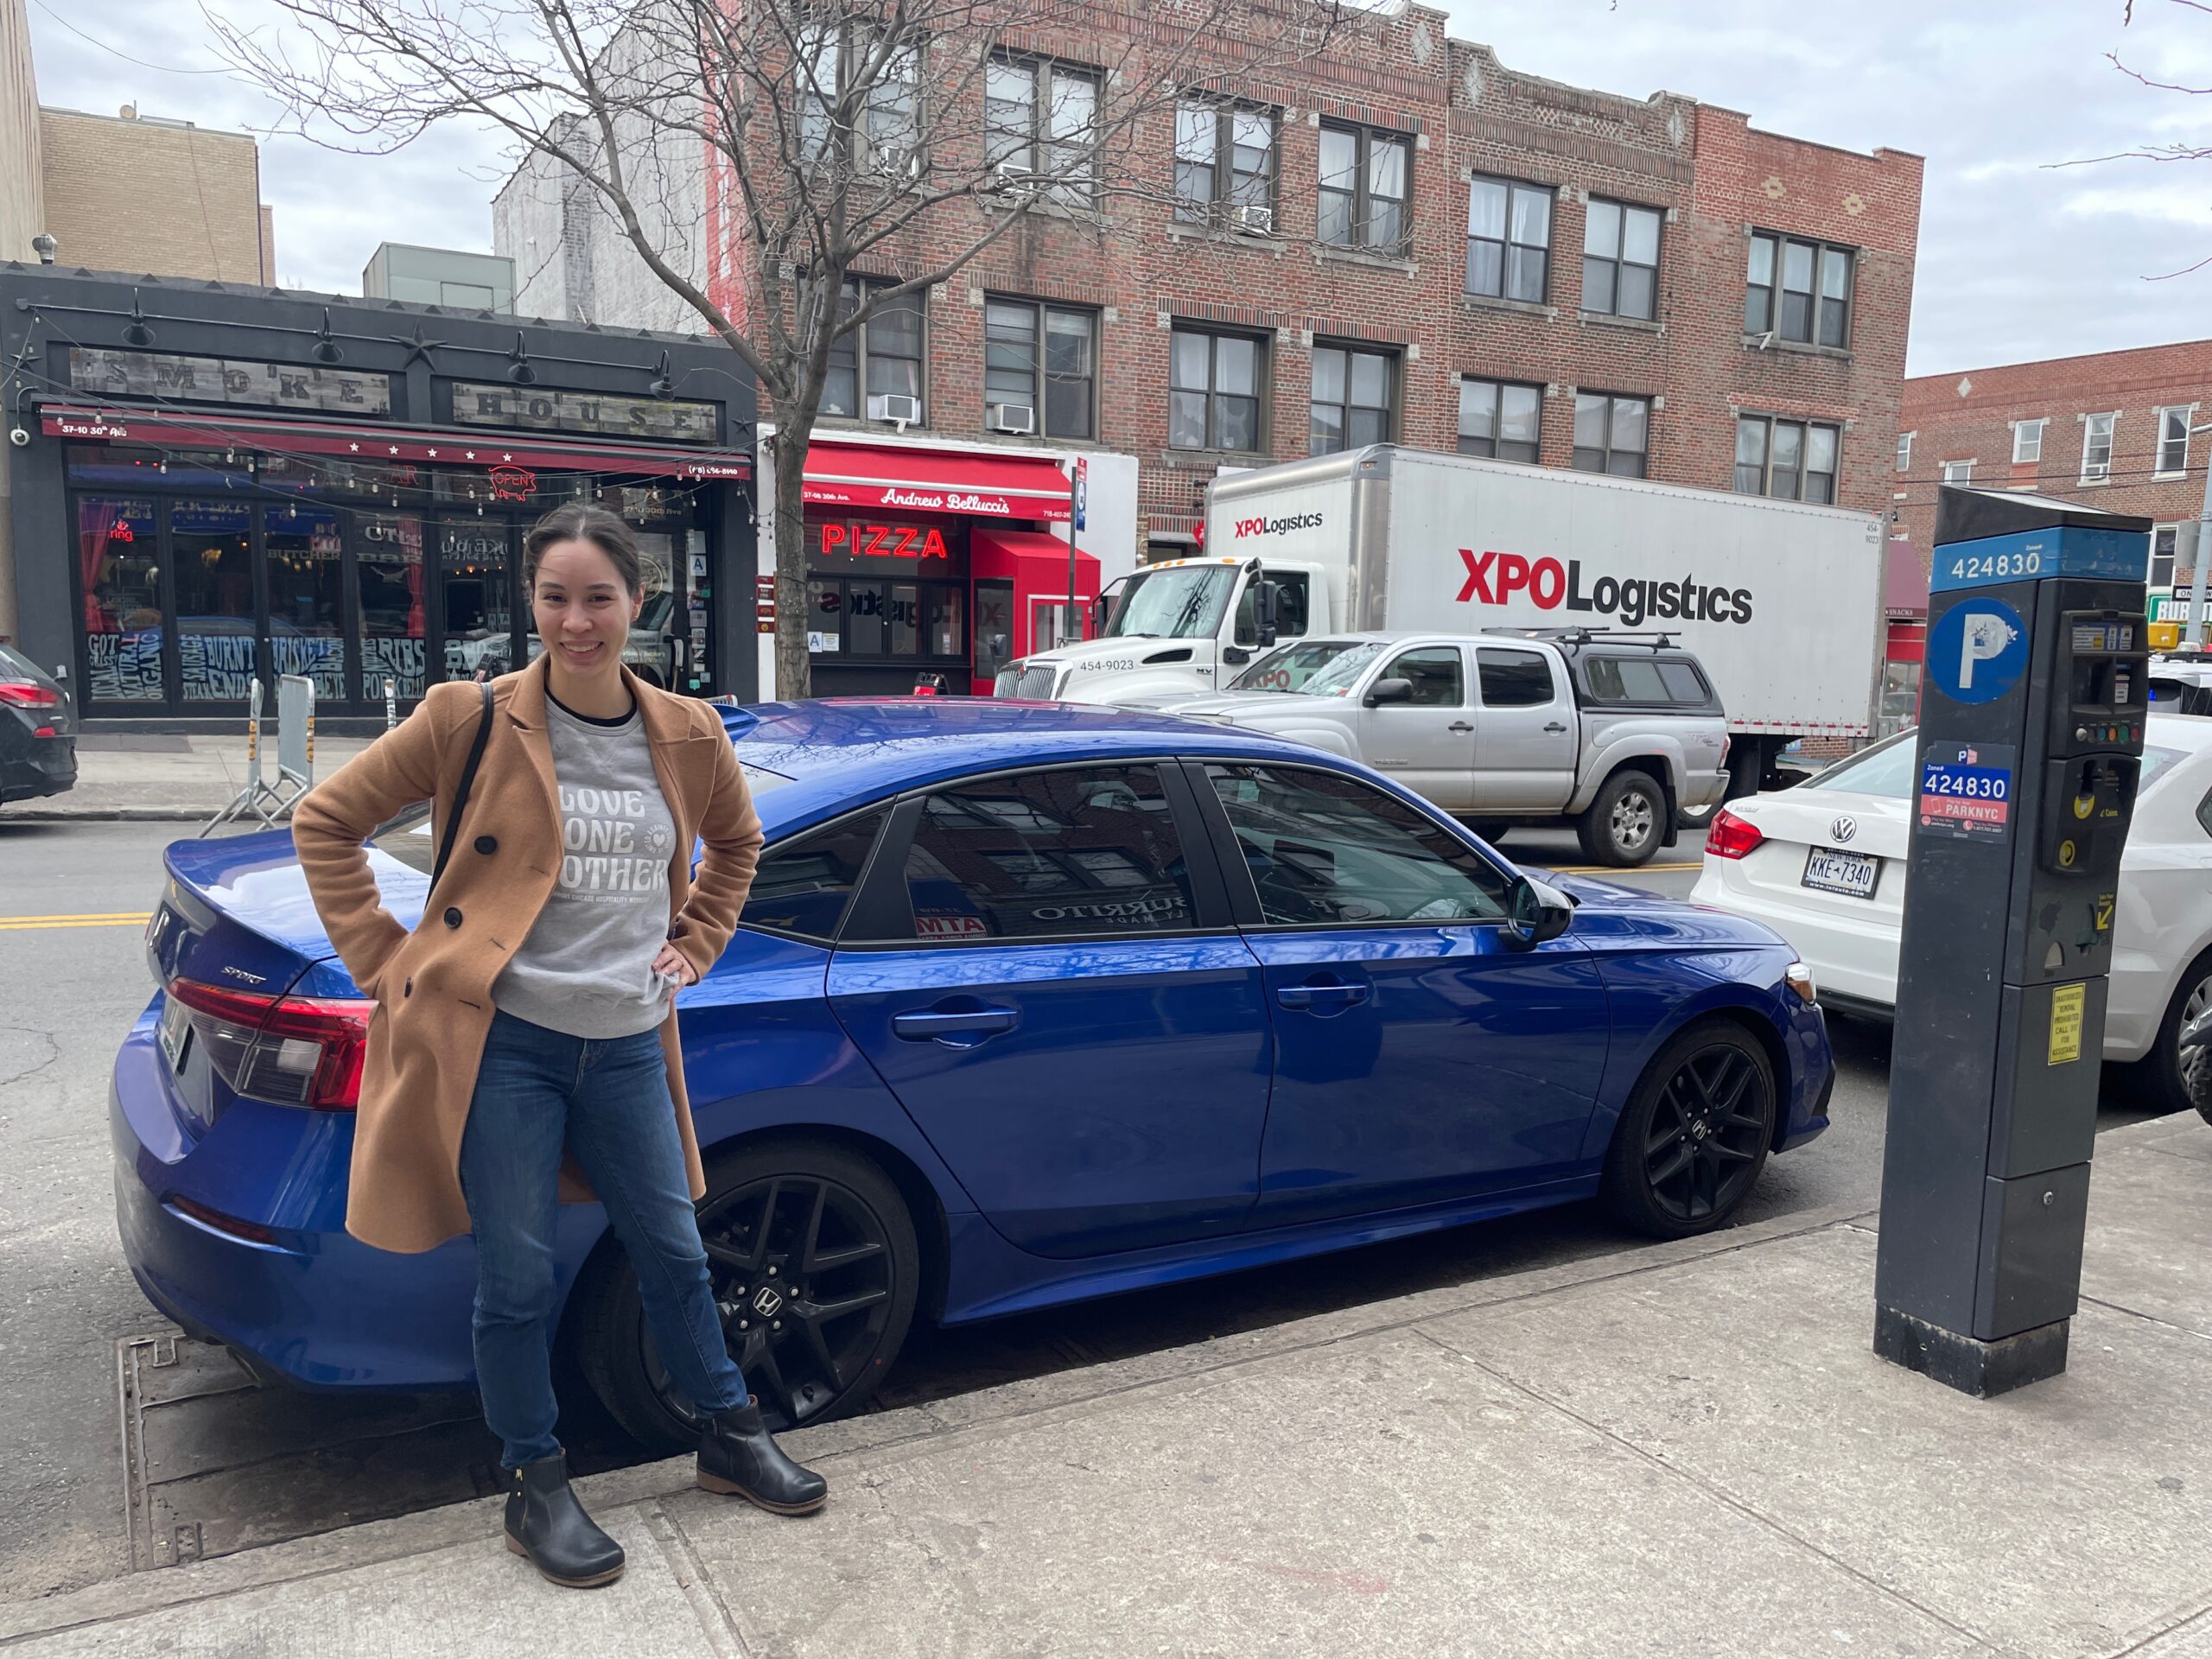 Allison standing in front of a parallel parked blue car